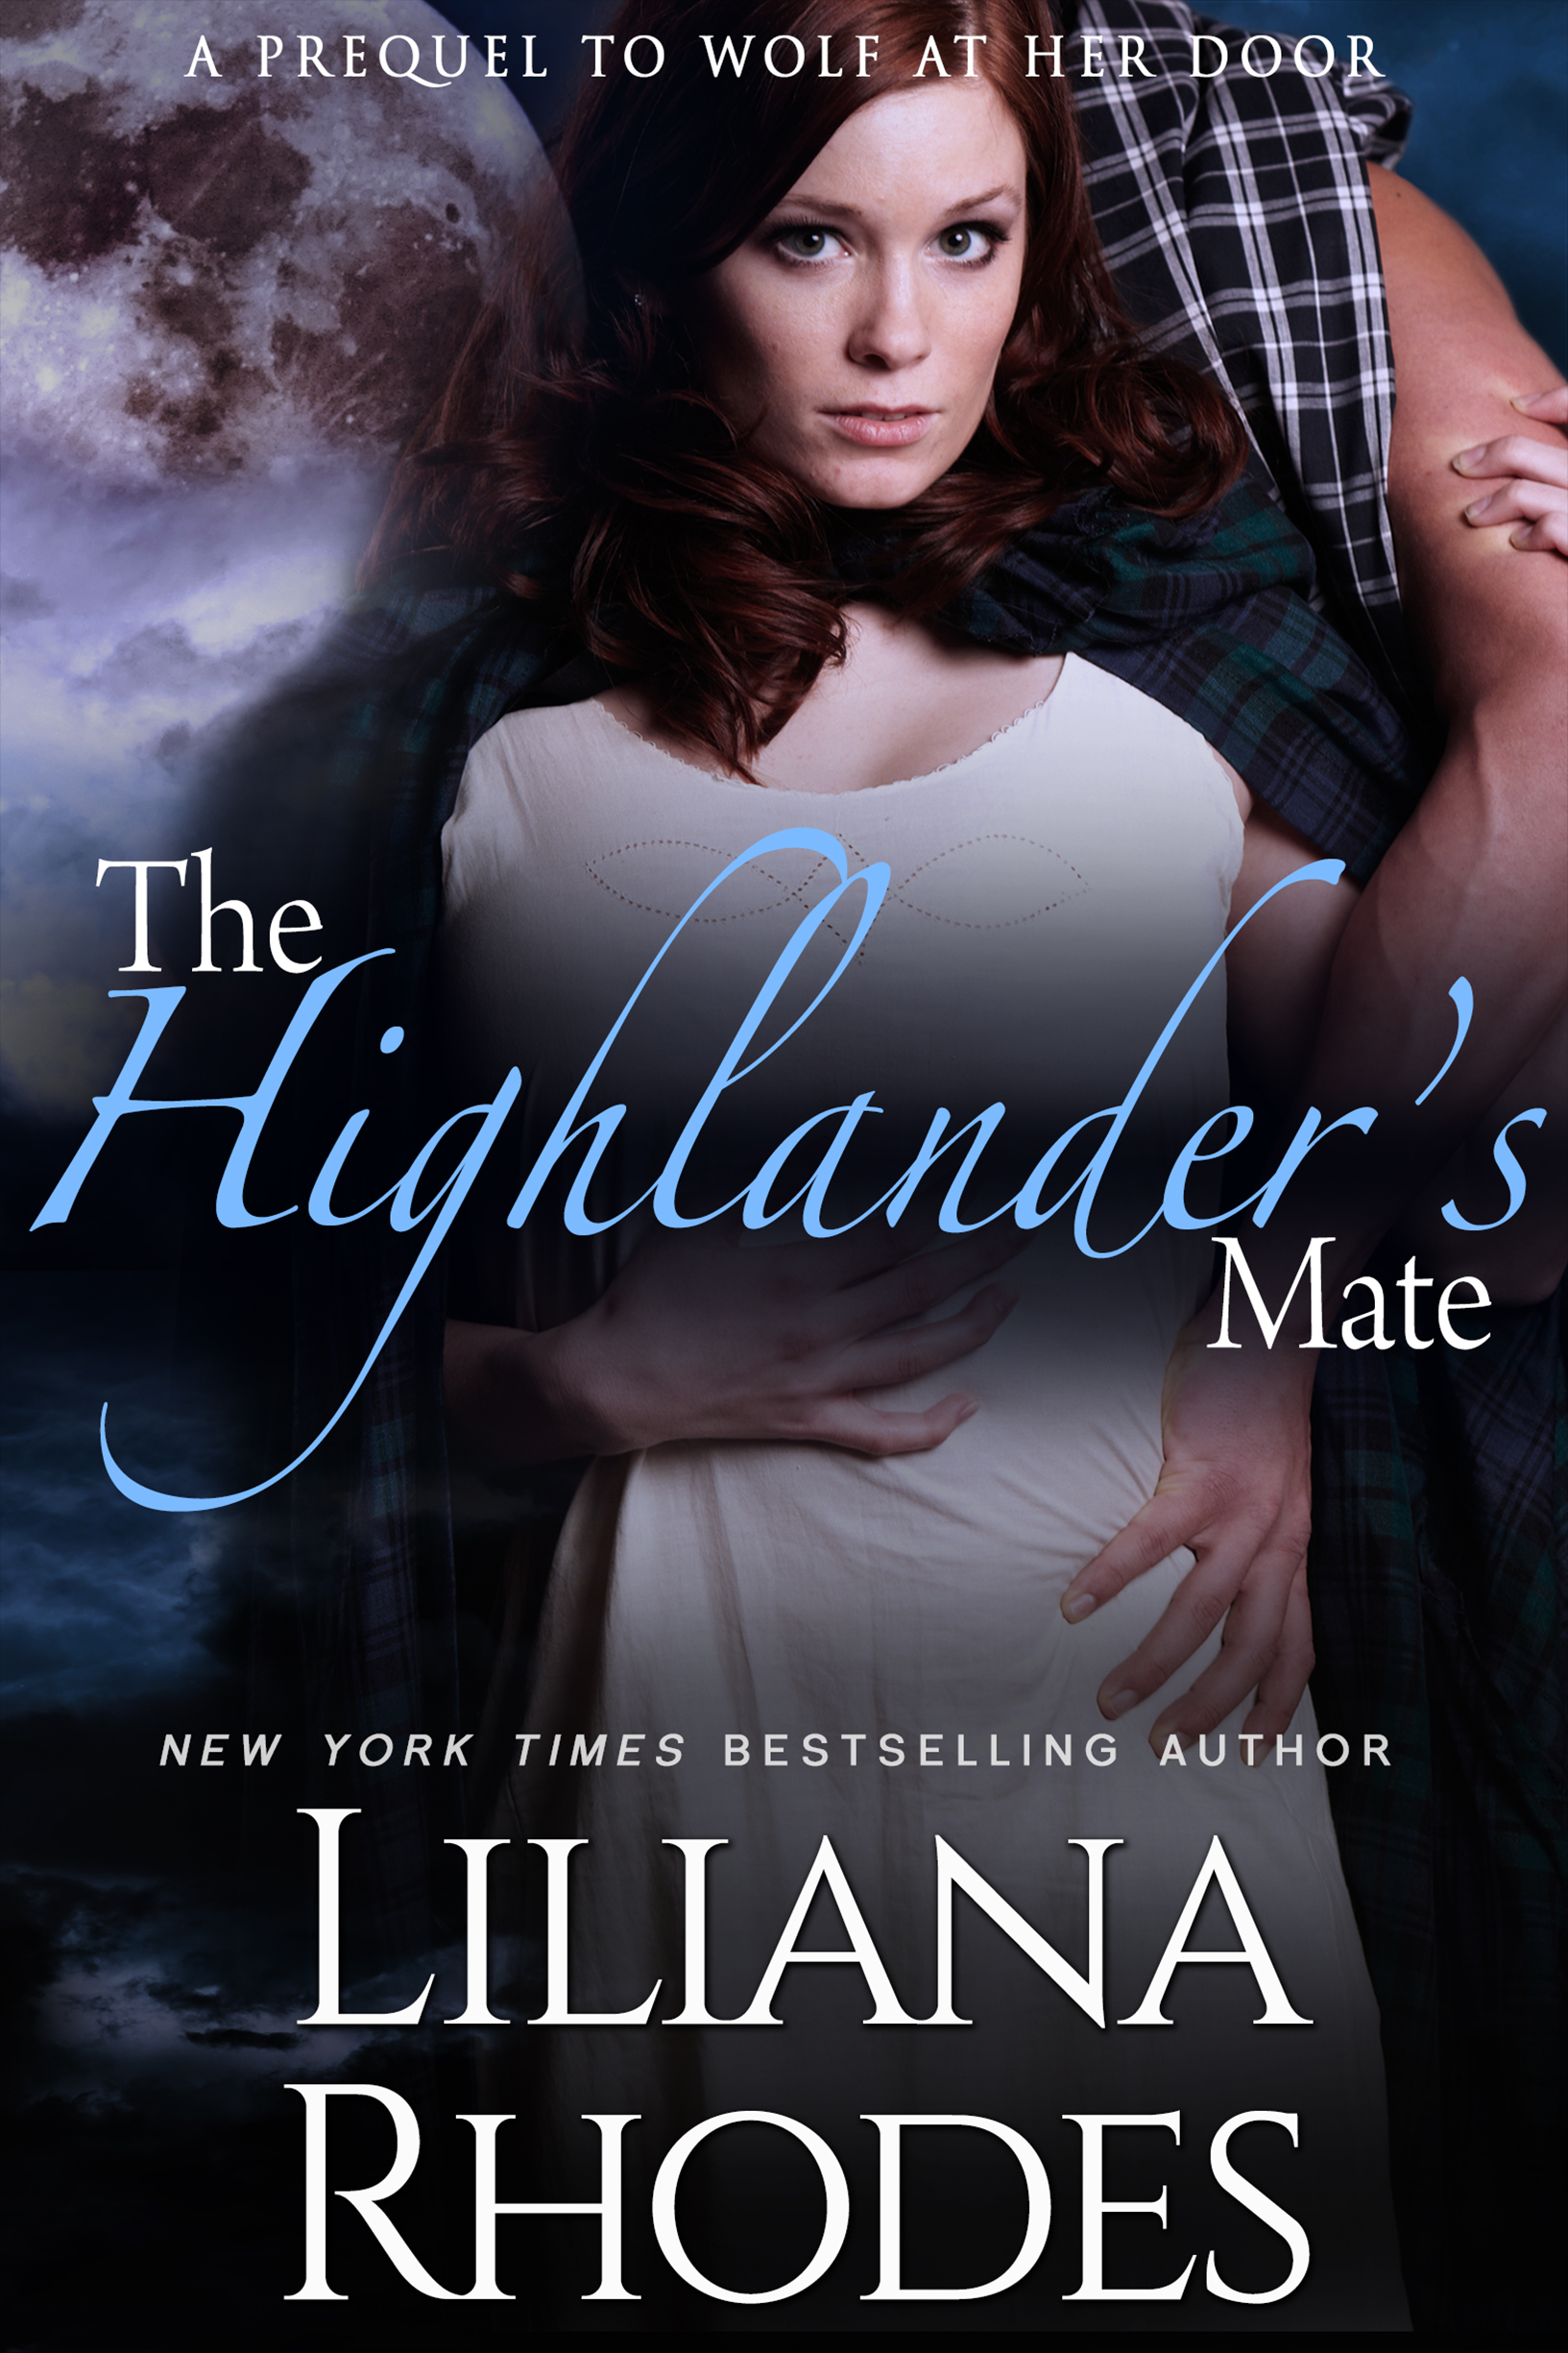 The Highlander's Mate by Liliana Rhodes